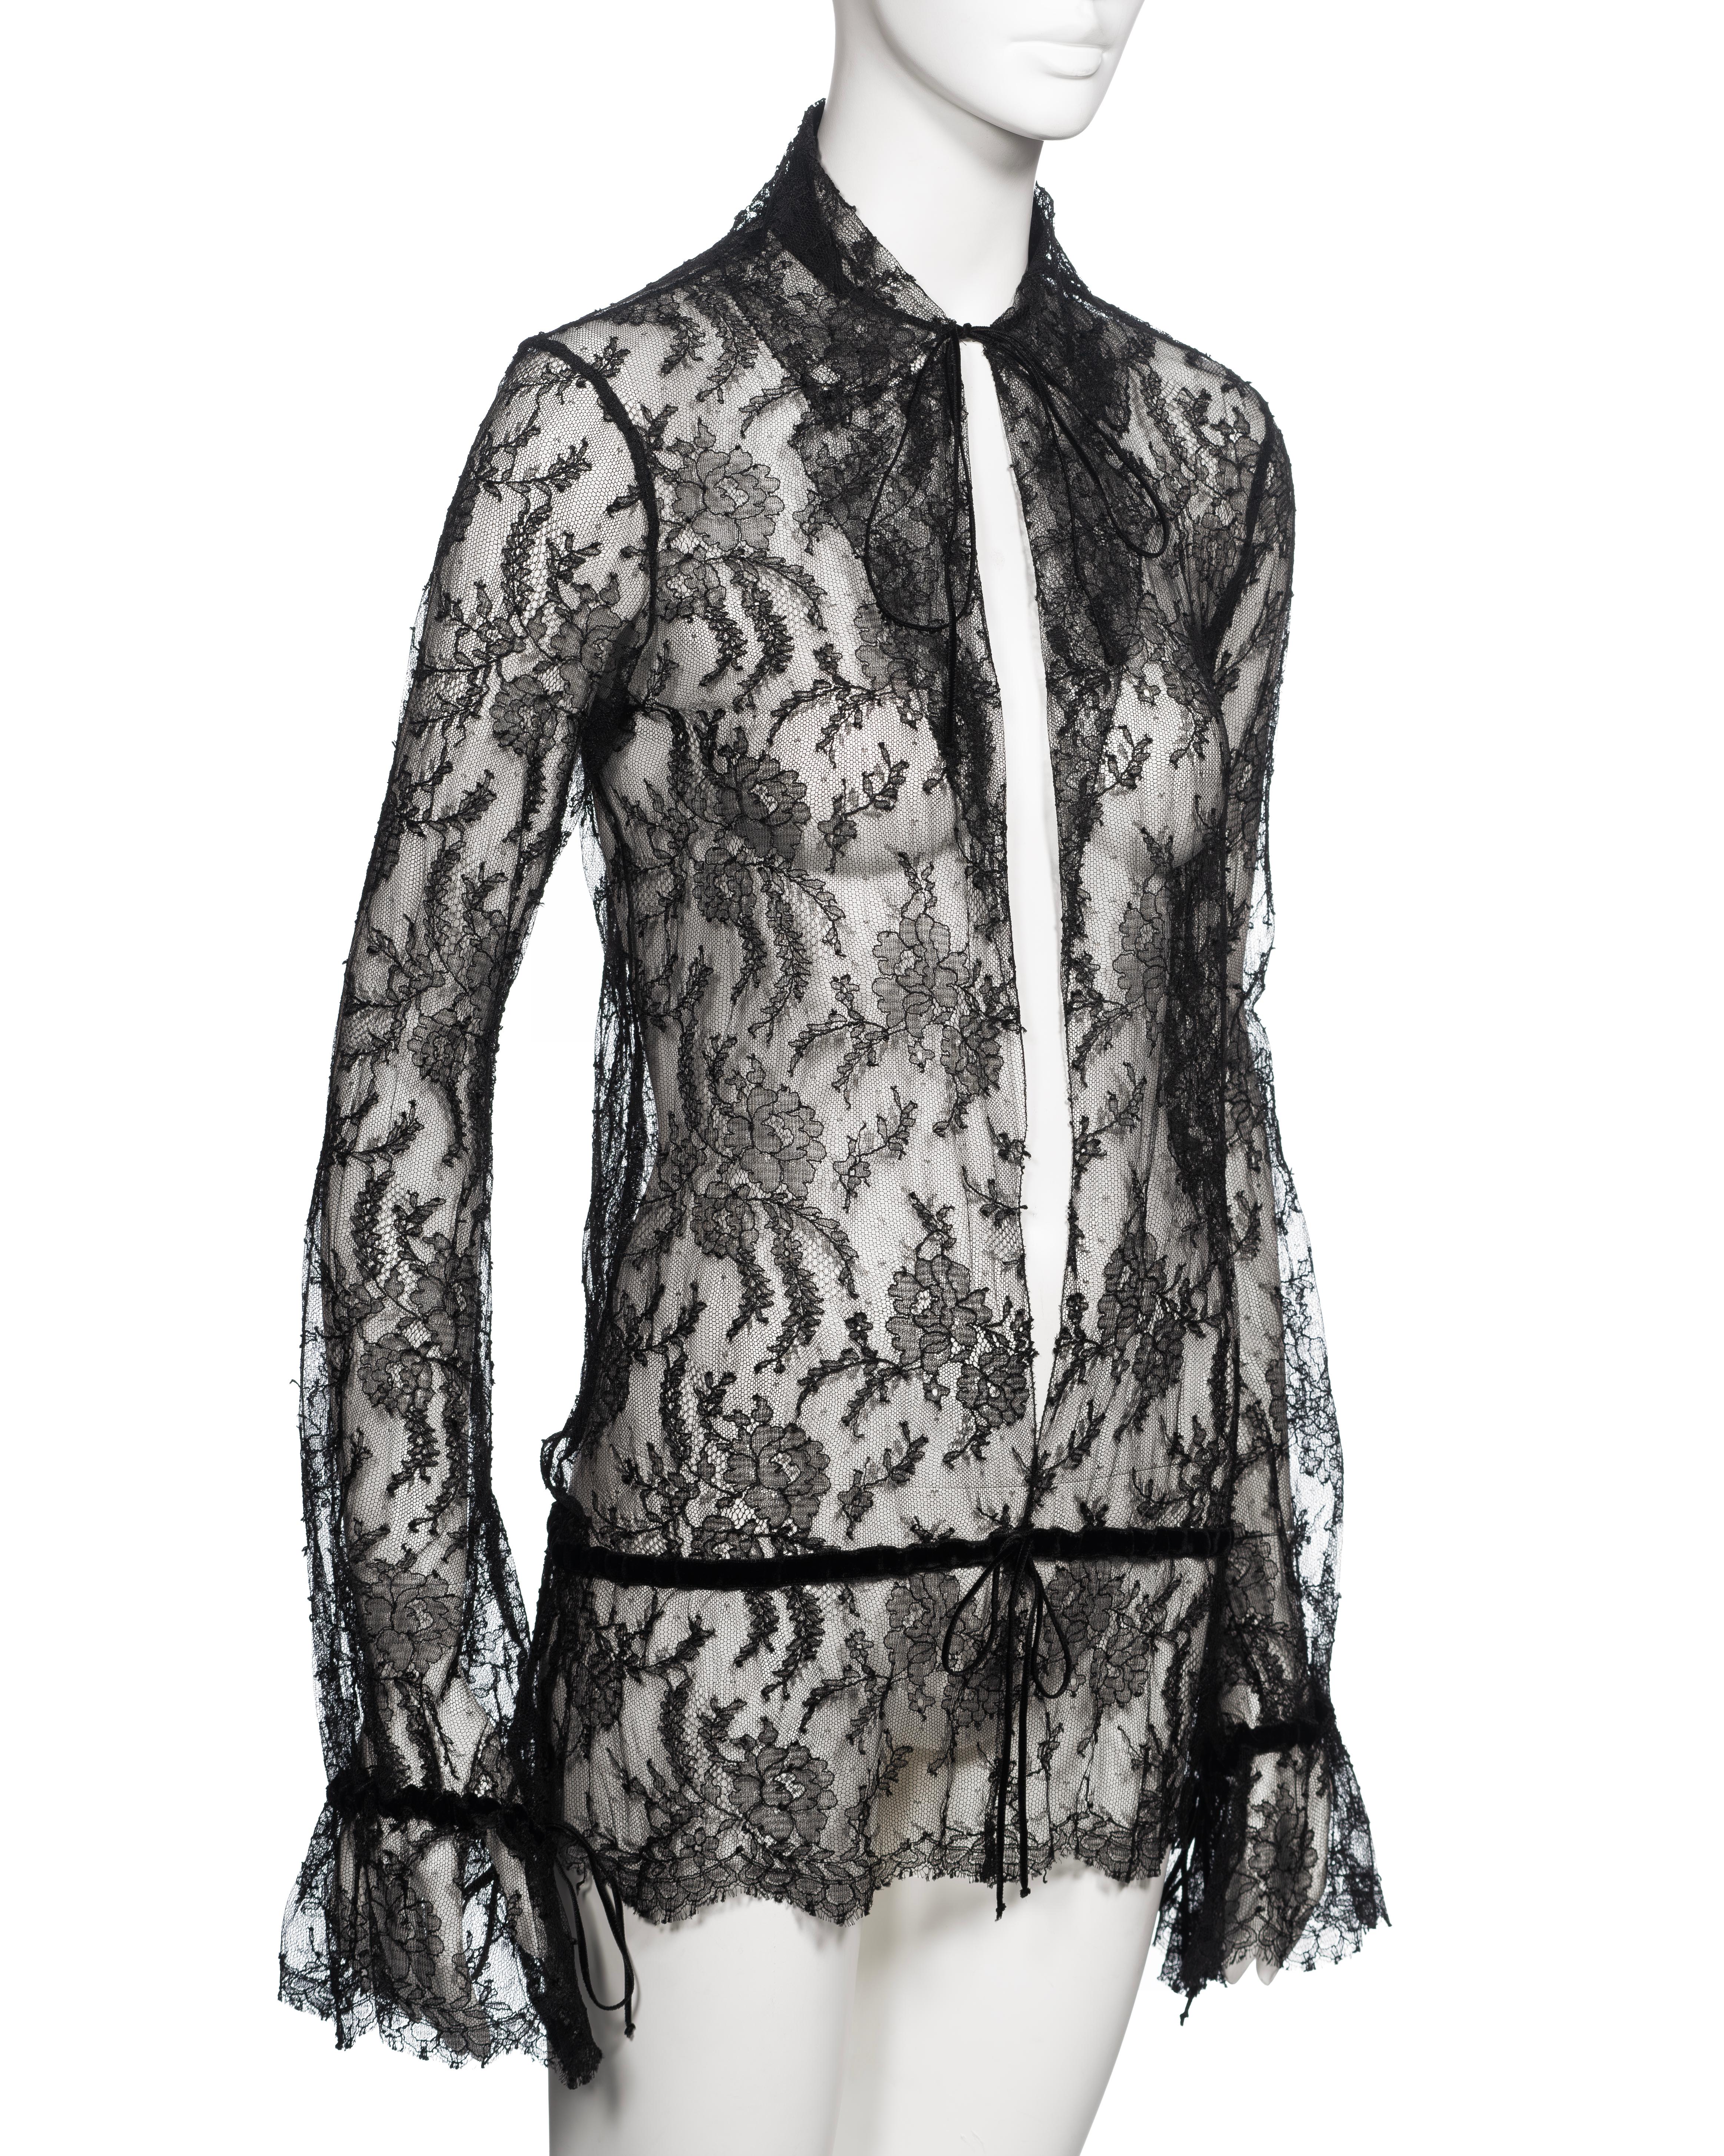 Chanel by Karl Lagerfeld Black Lace Blouse with Velvet Ribbon Trim, FW 2004 1